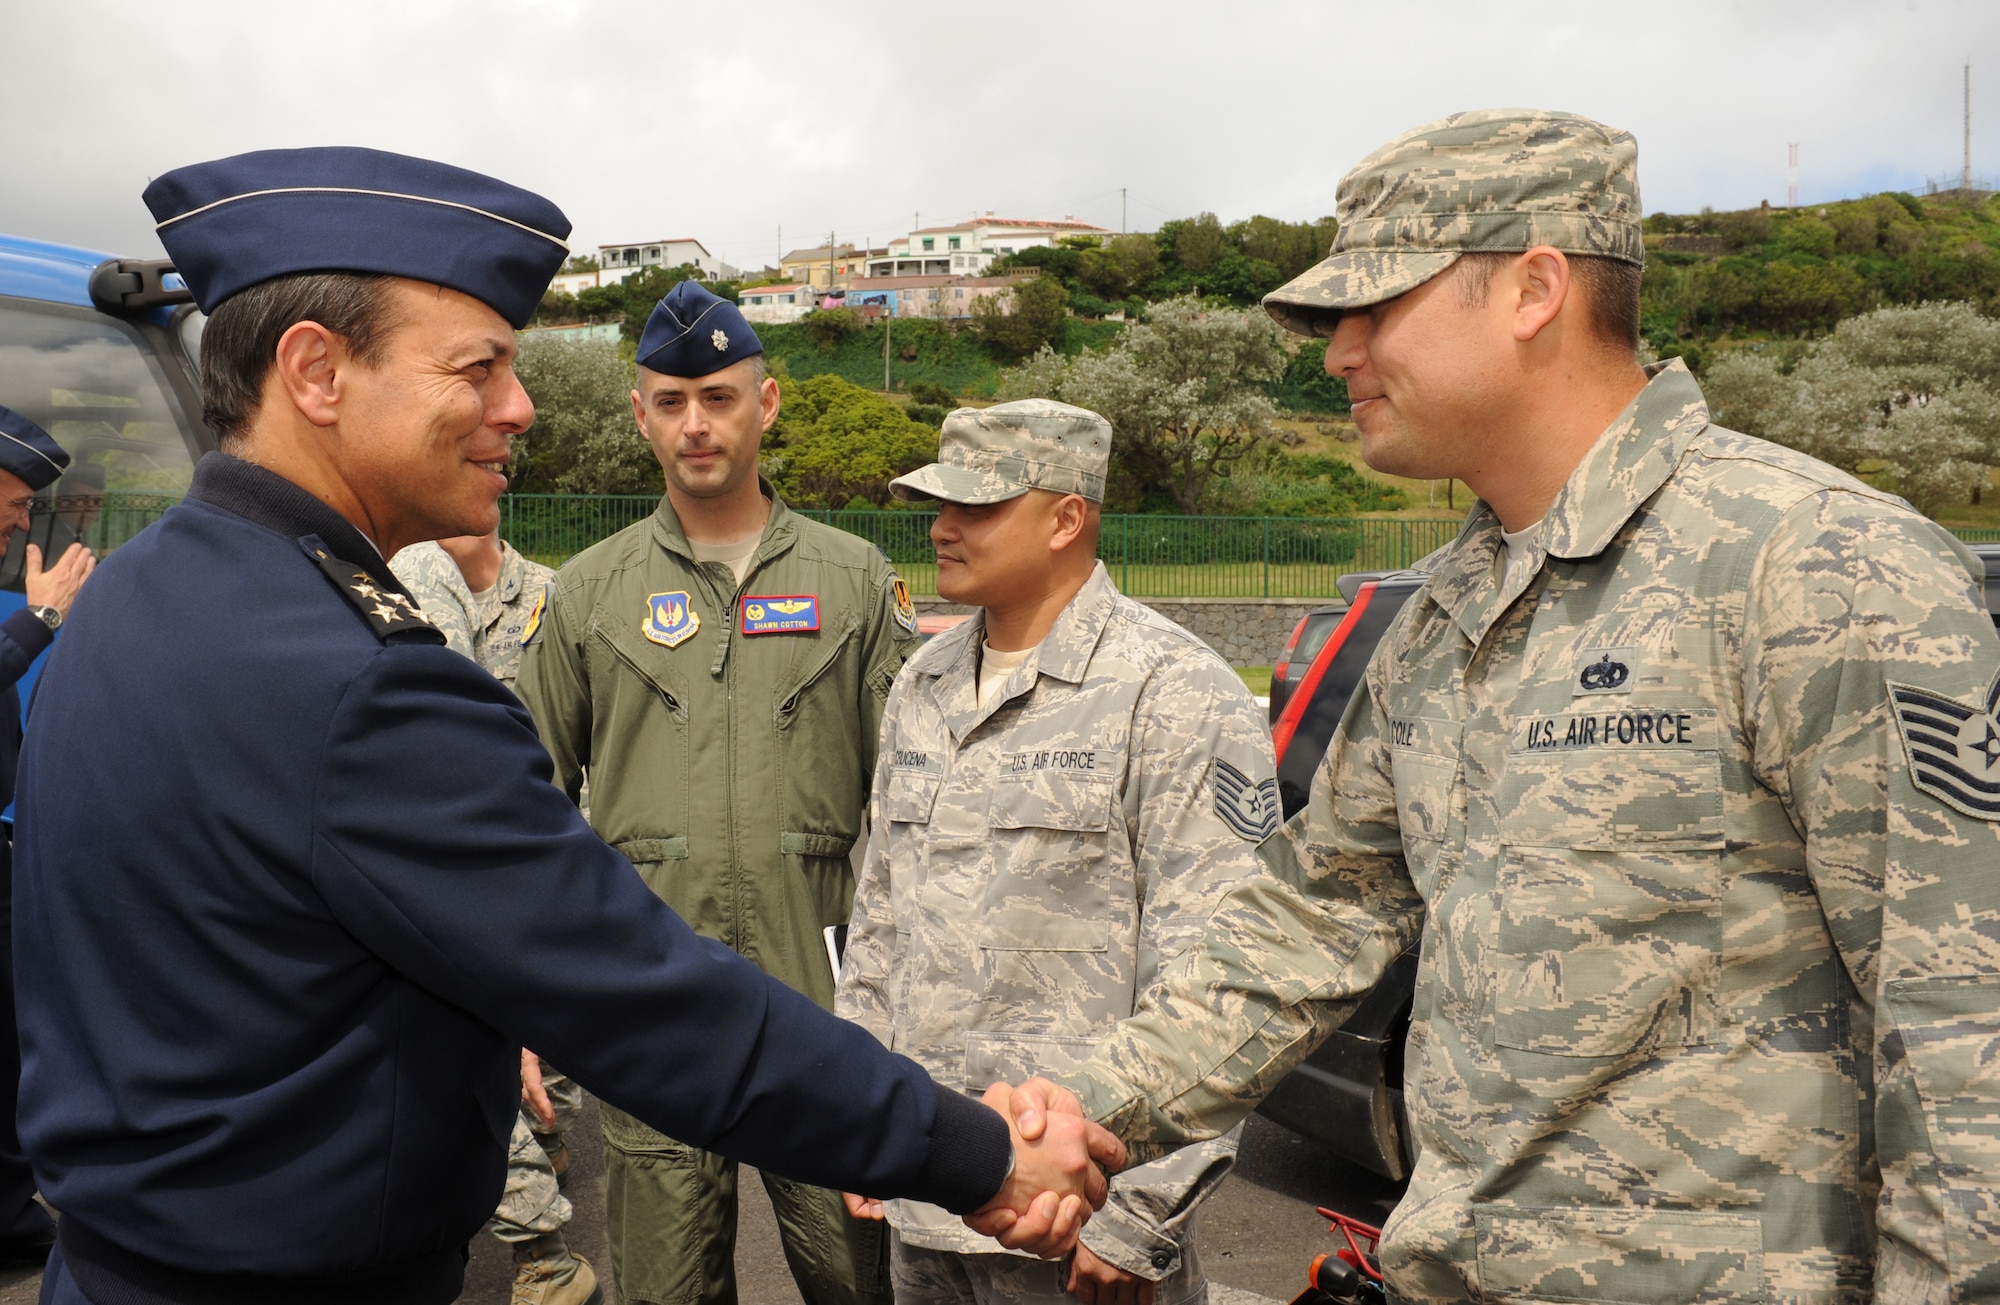 Gen. Jose Antonio Magalhaes Araujo Pinheiro, Portuguese Air Force Chief of Staff, greets Tech. Sgt. James Cole, 65th Operations Support Squadron, during his visit to the 65th ABW, June 4, 2013.   Gen. Araujo Pinheiro stopped at Lajes Field for the 72nd Anniversary of Portuguese Air Base 4.  (Photo by Guido Melo/released)